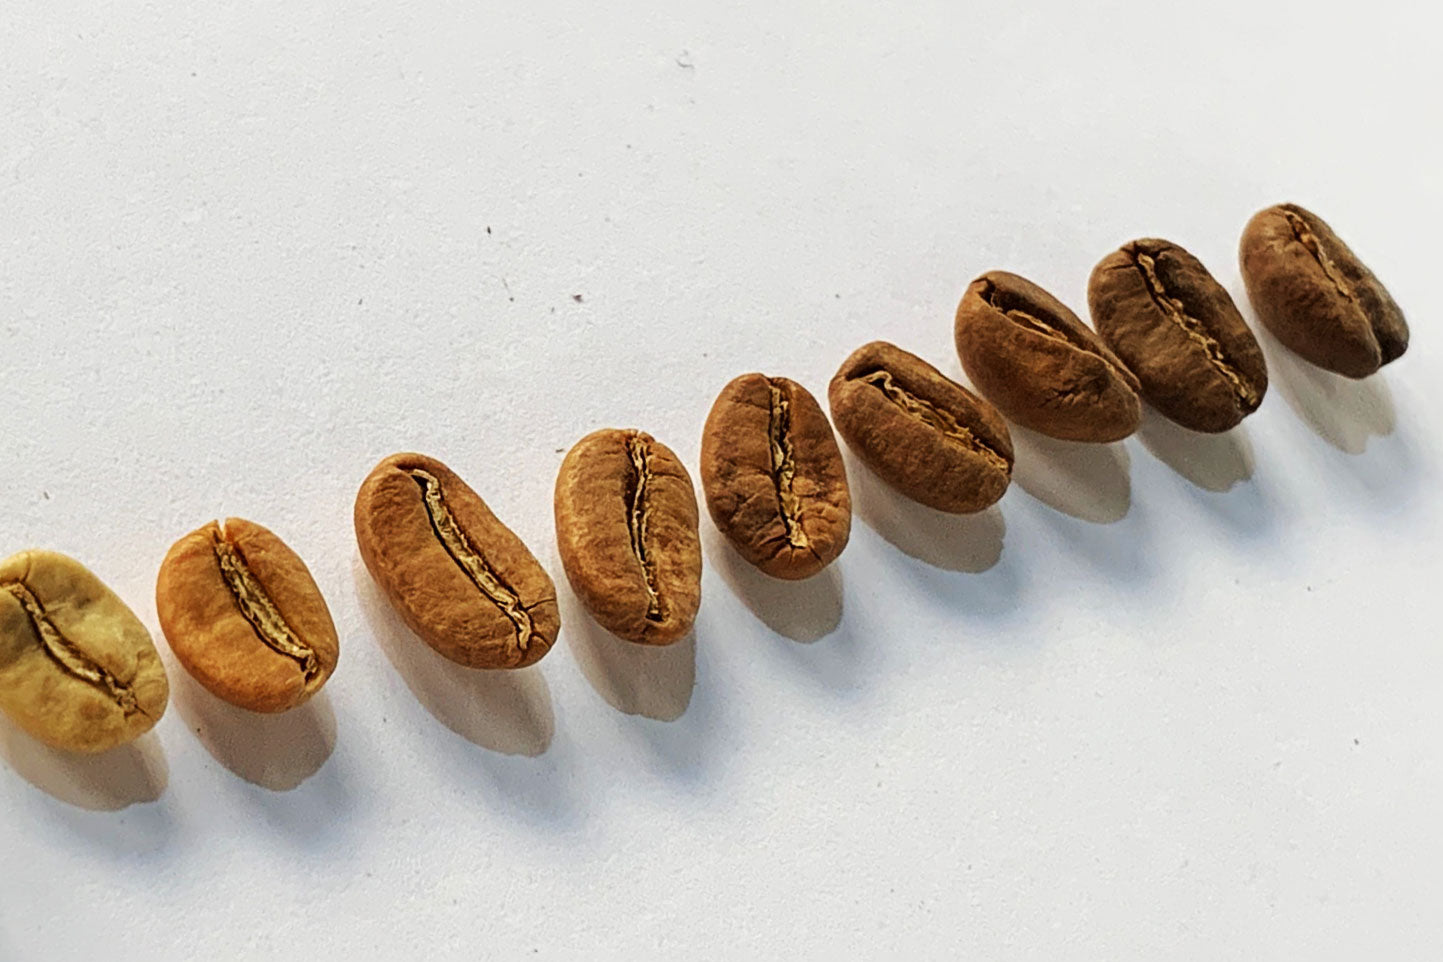 Different roast level of coffee beans explained